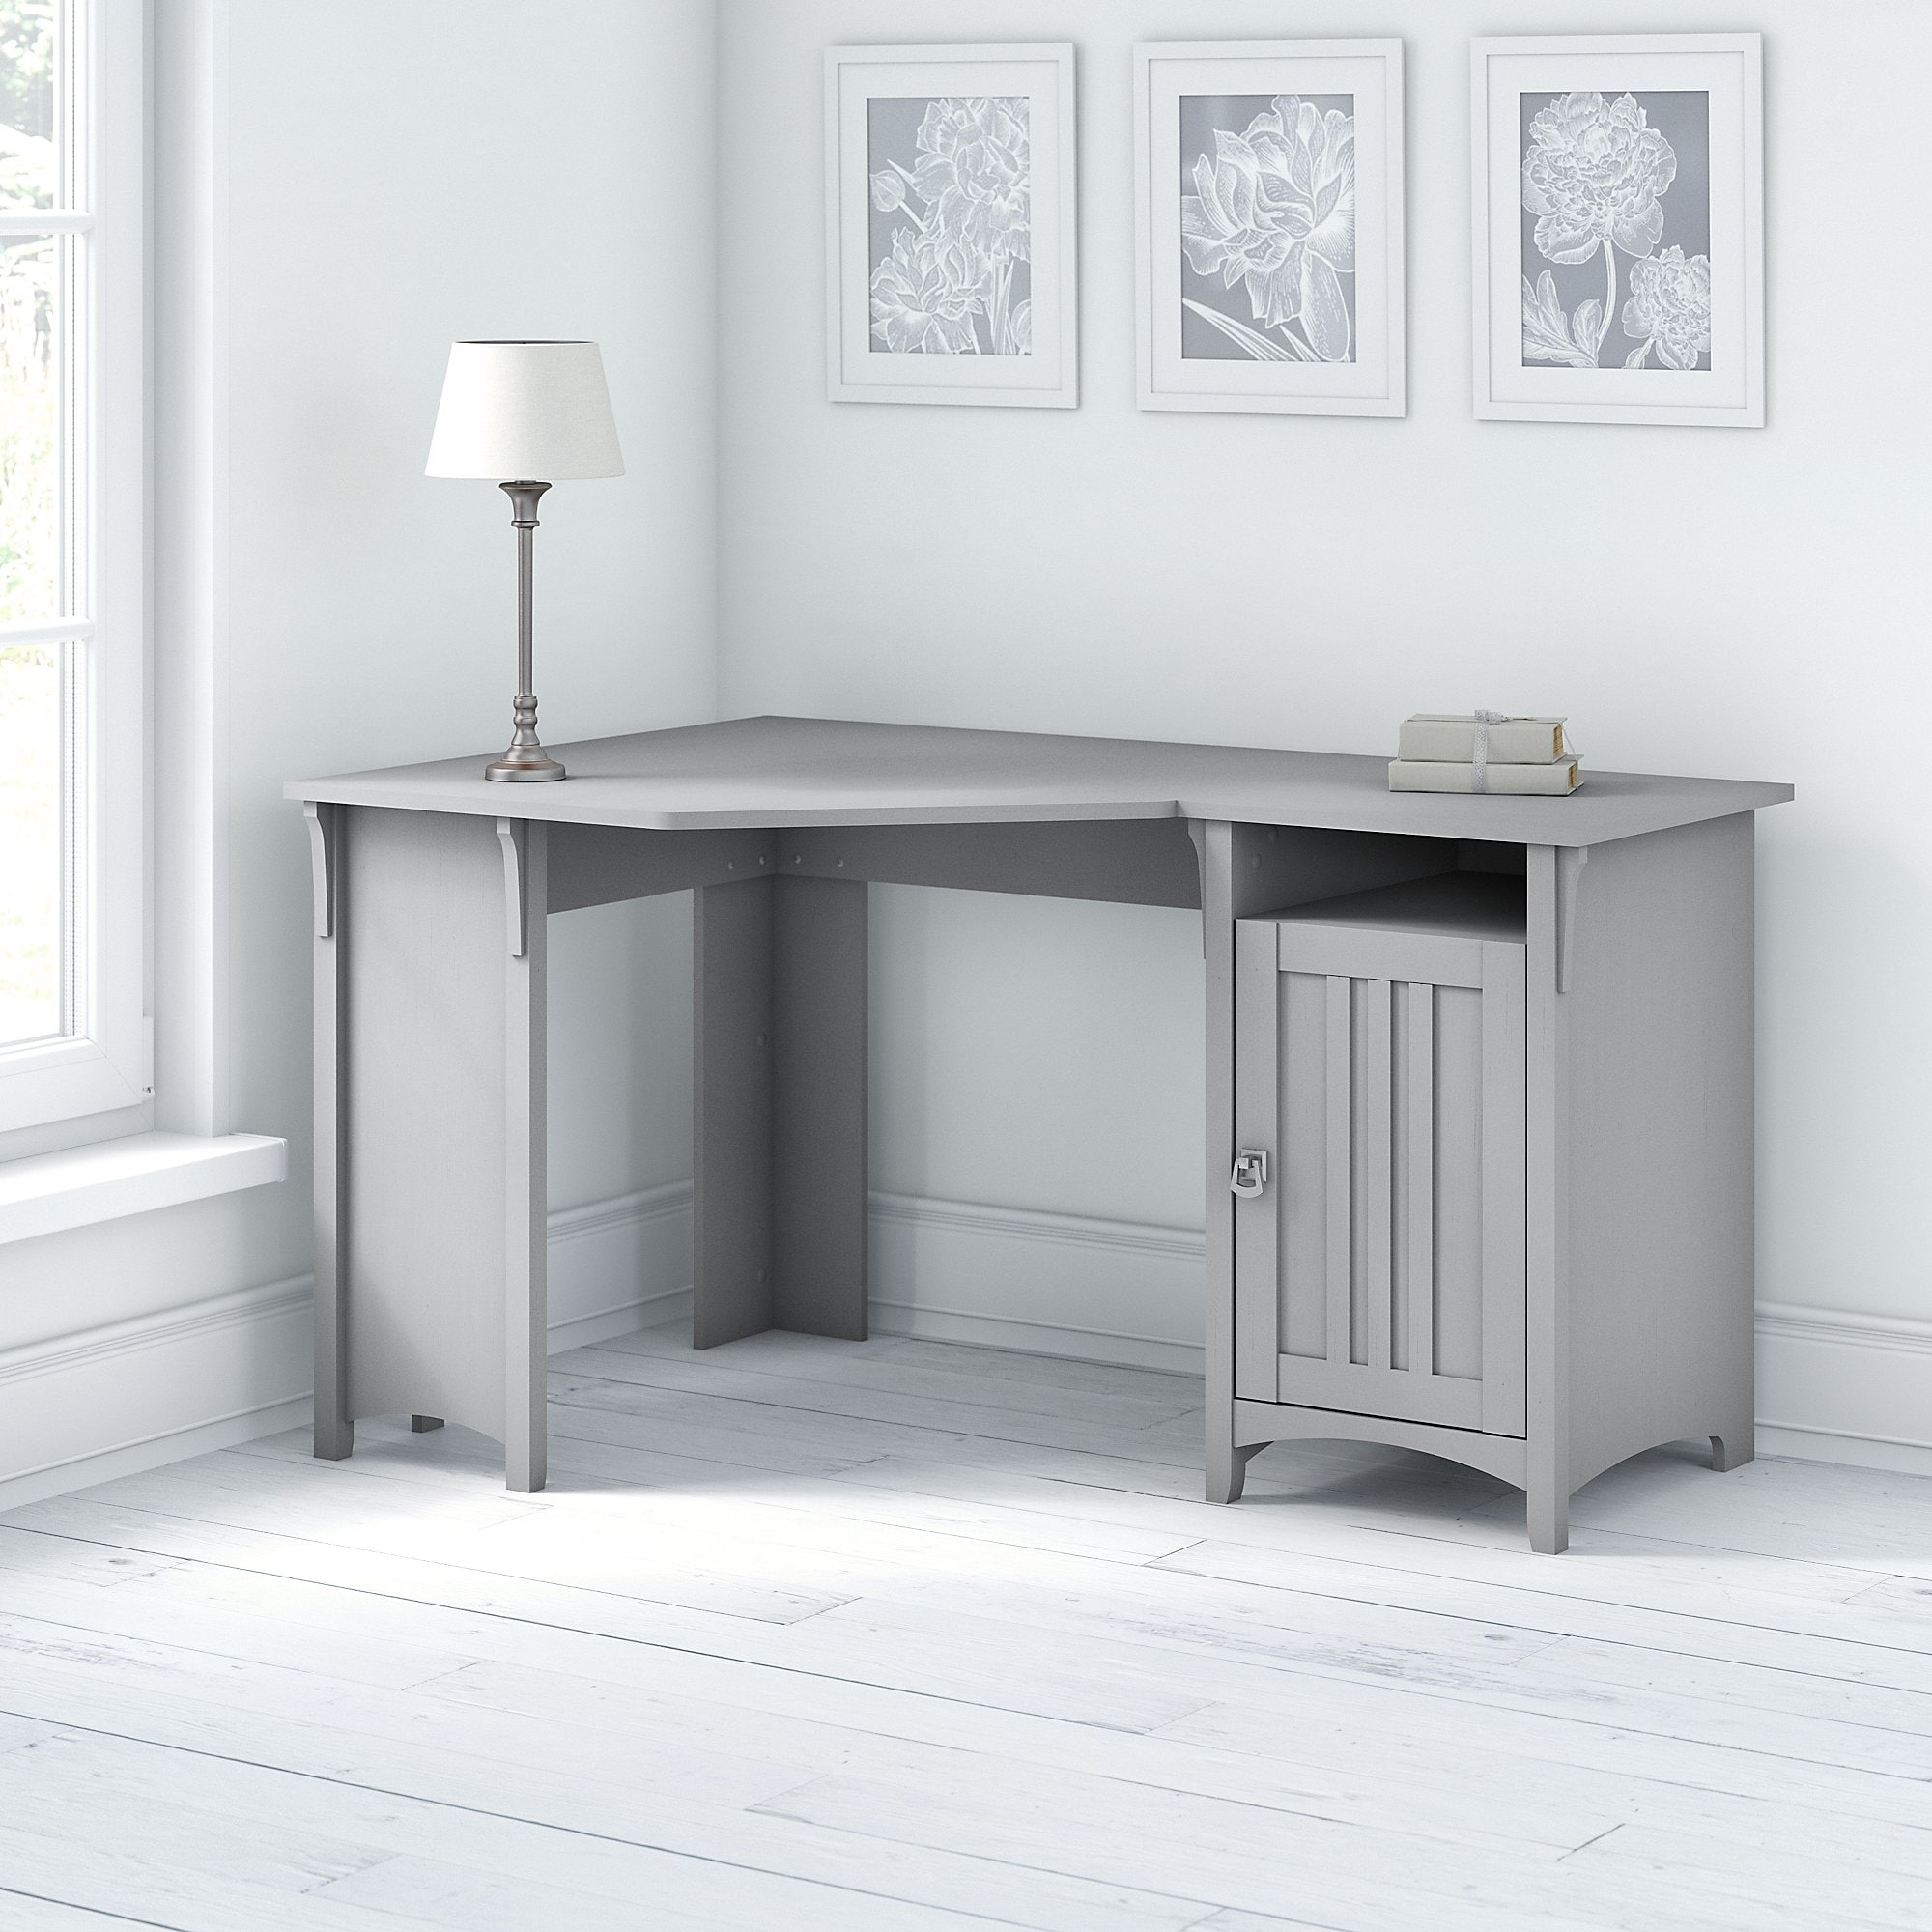 https://ak1.ostkcdn.com/images/products/is/images/direct/72a31a72f2813542c69cc93eeab74642bb06e7f7/Salinas-Corner-Desk-with-Storage-by-Bush-Furniture-in-Cape-Cod-Gray.jpg